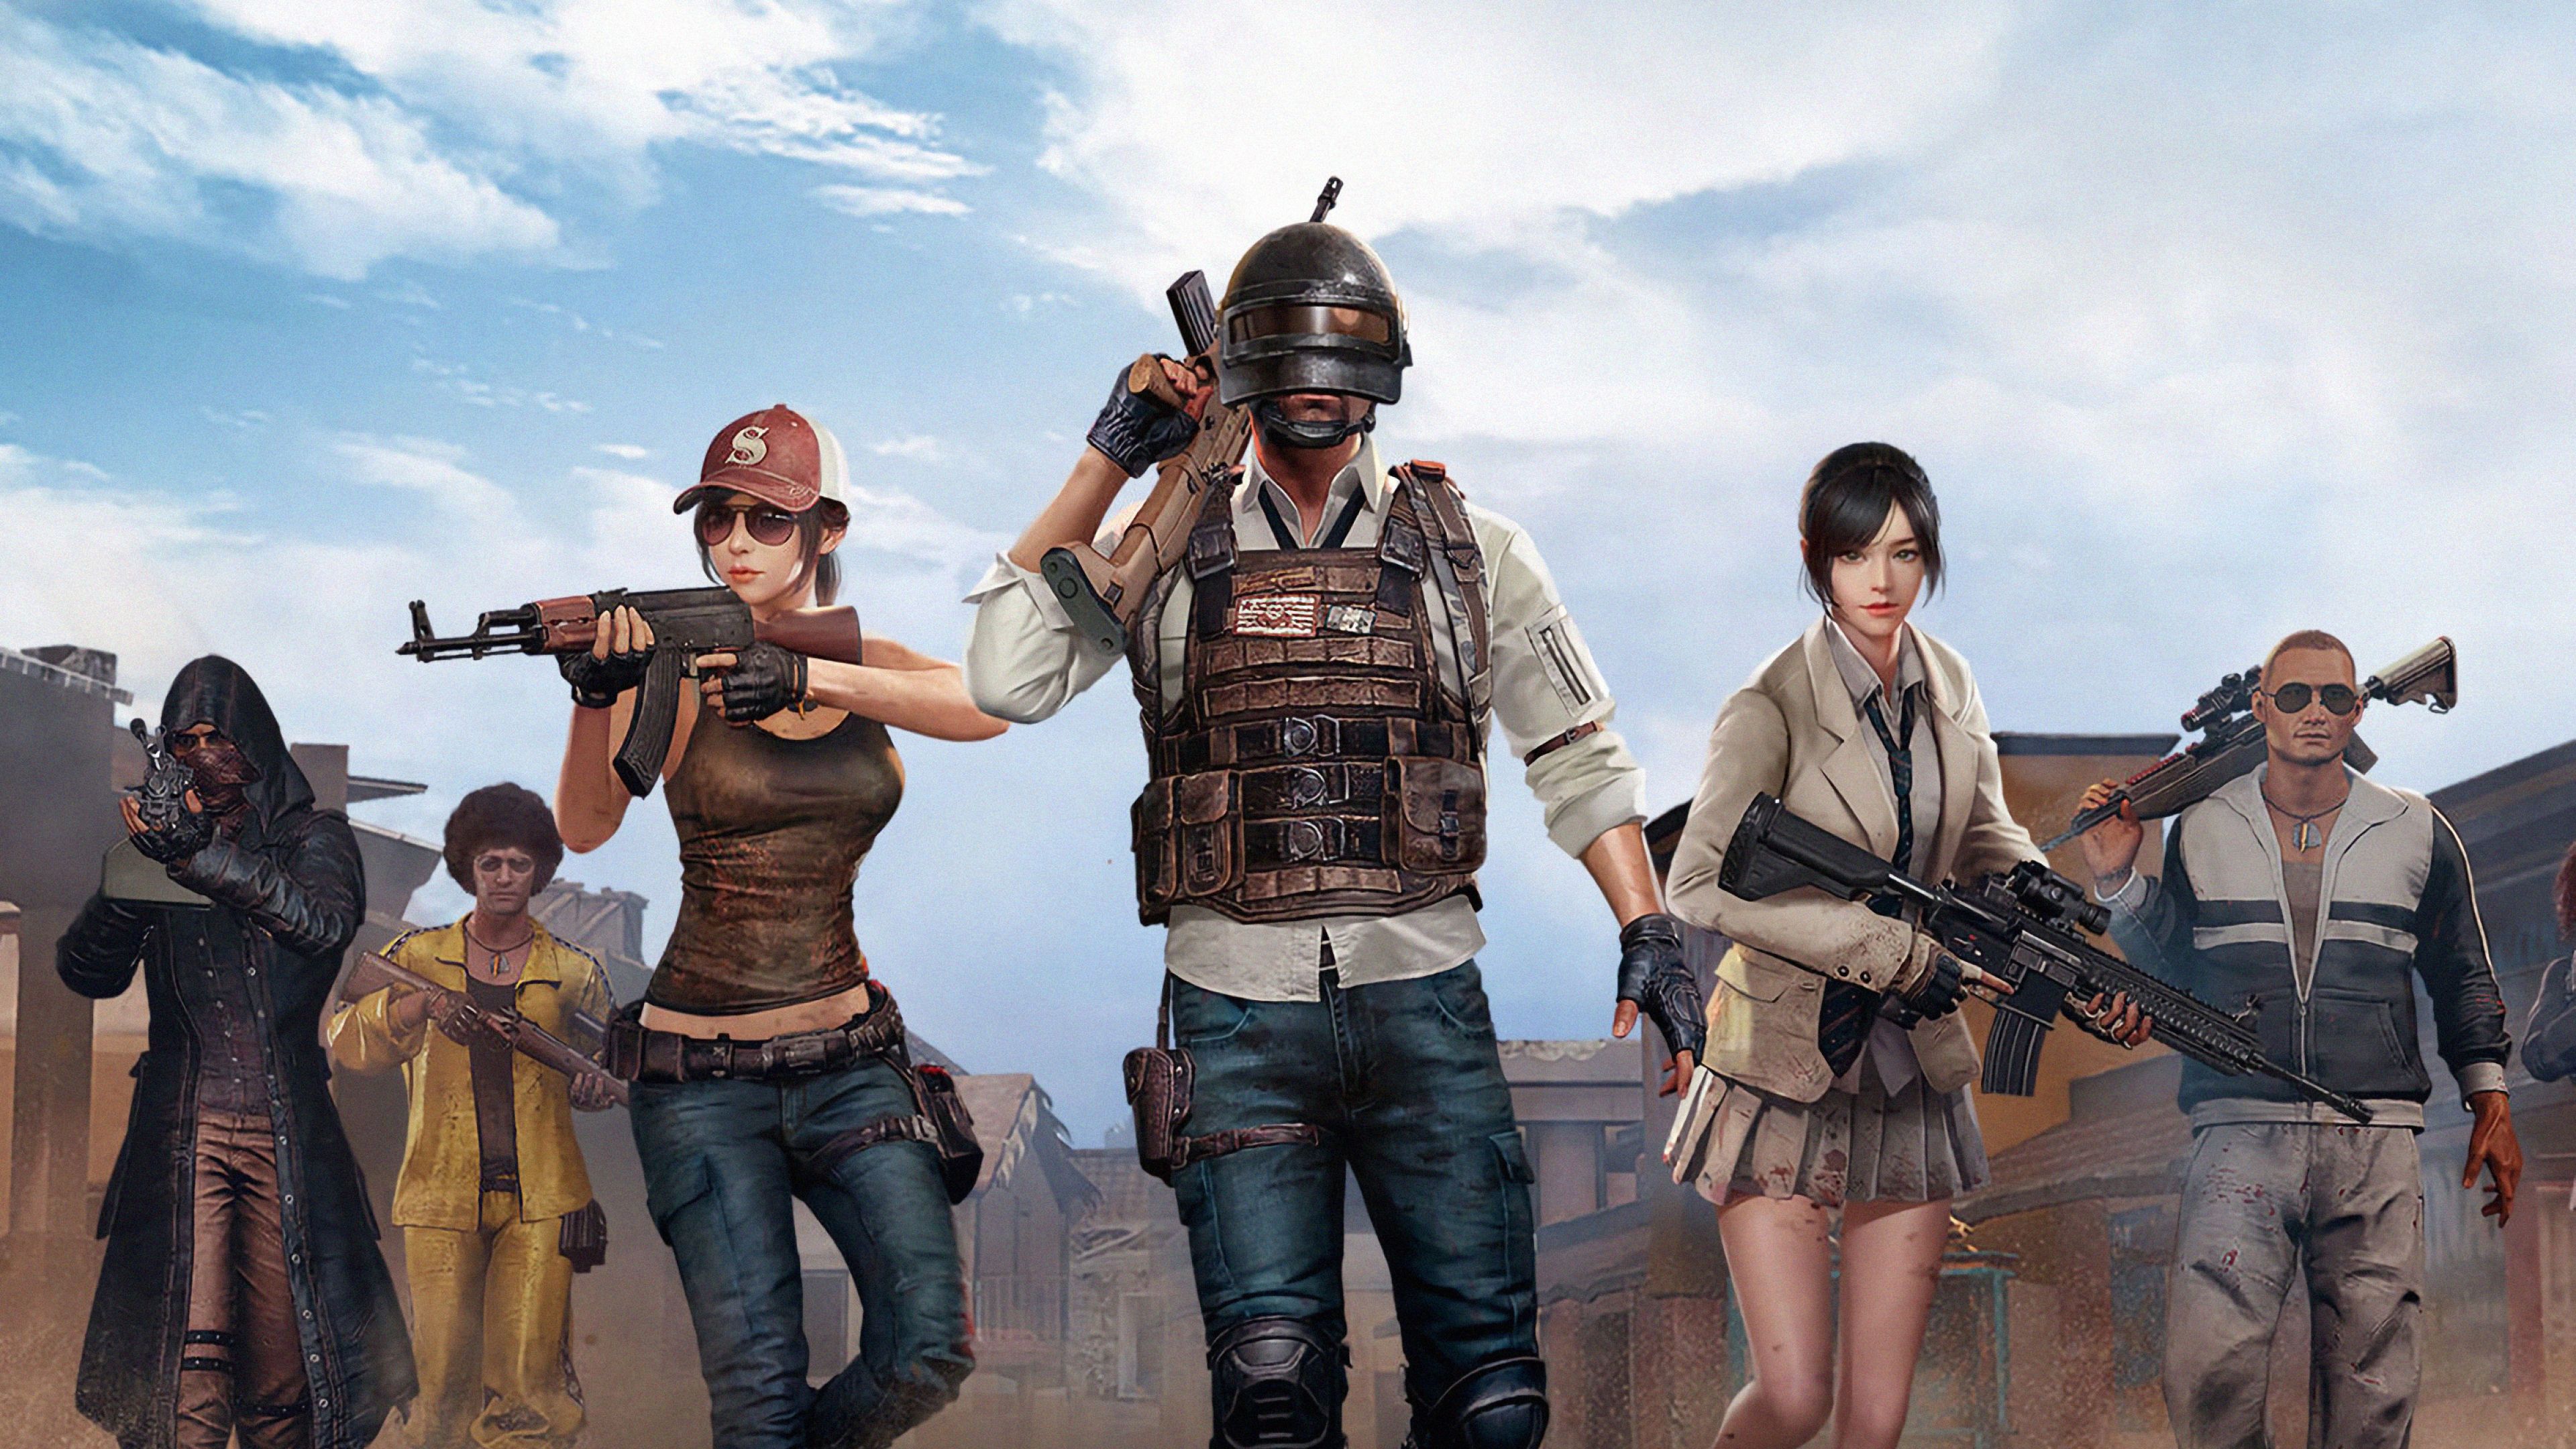 Squad Of Pubg 4K Wallpaper, HD Games 4K Wallpaper, Image, Photo and Background